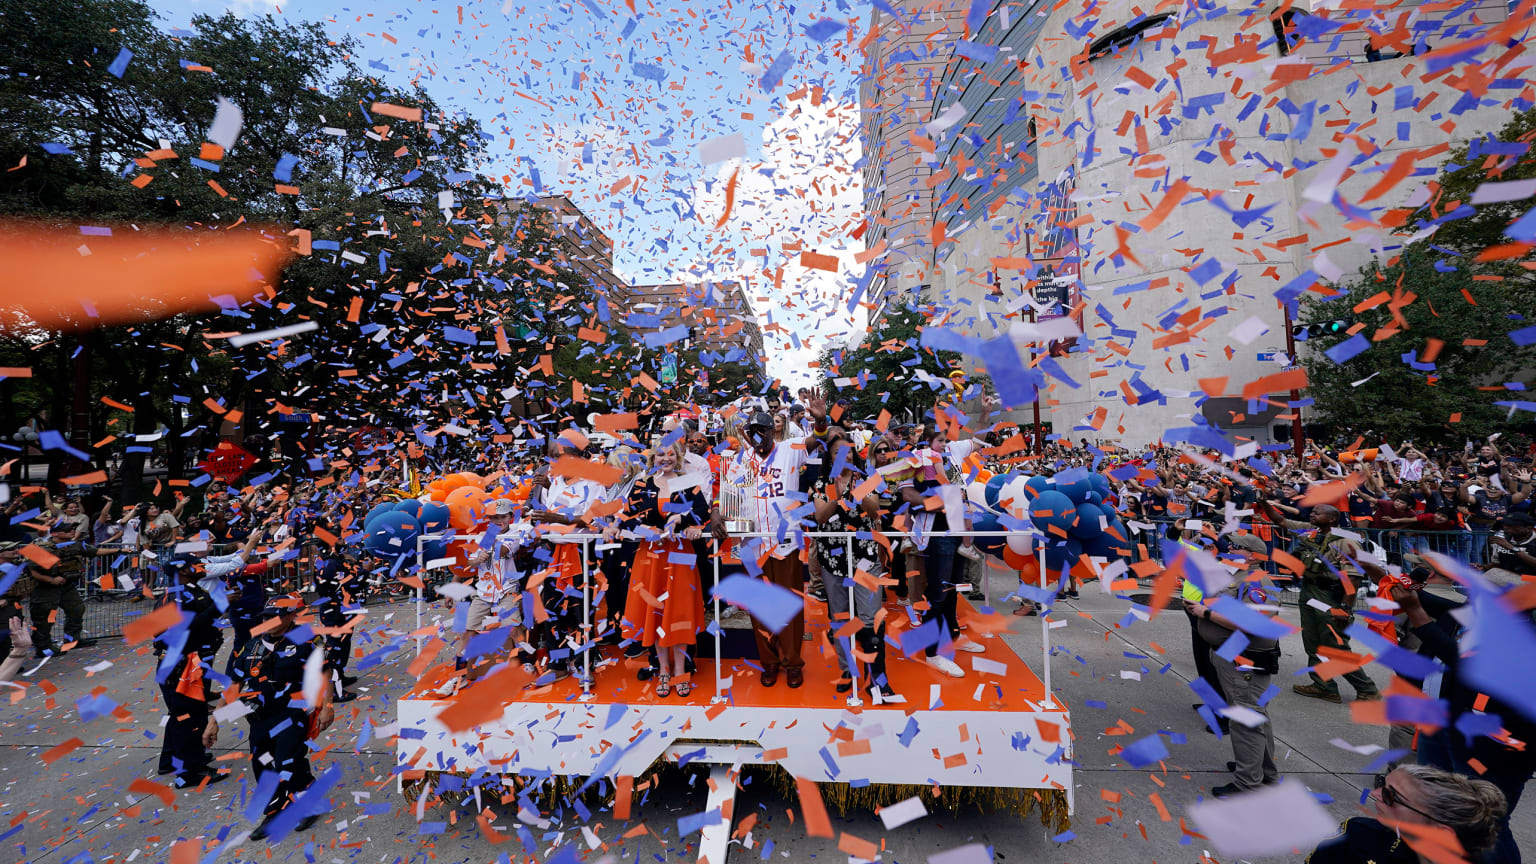 A parade float is seen through blue and orange confetti falling from nearby buildings